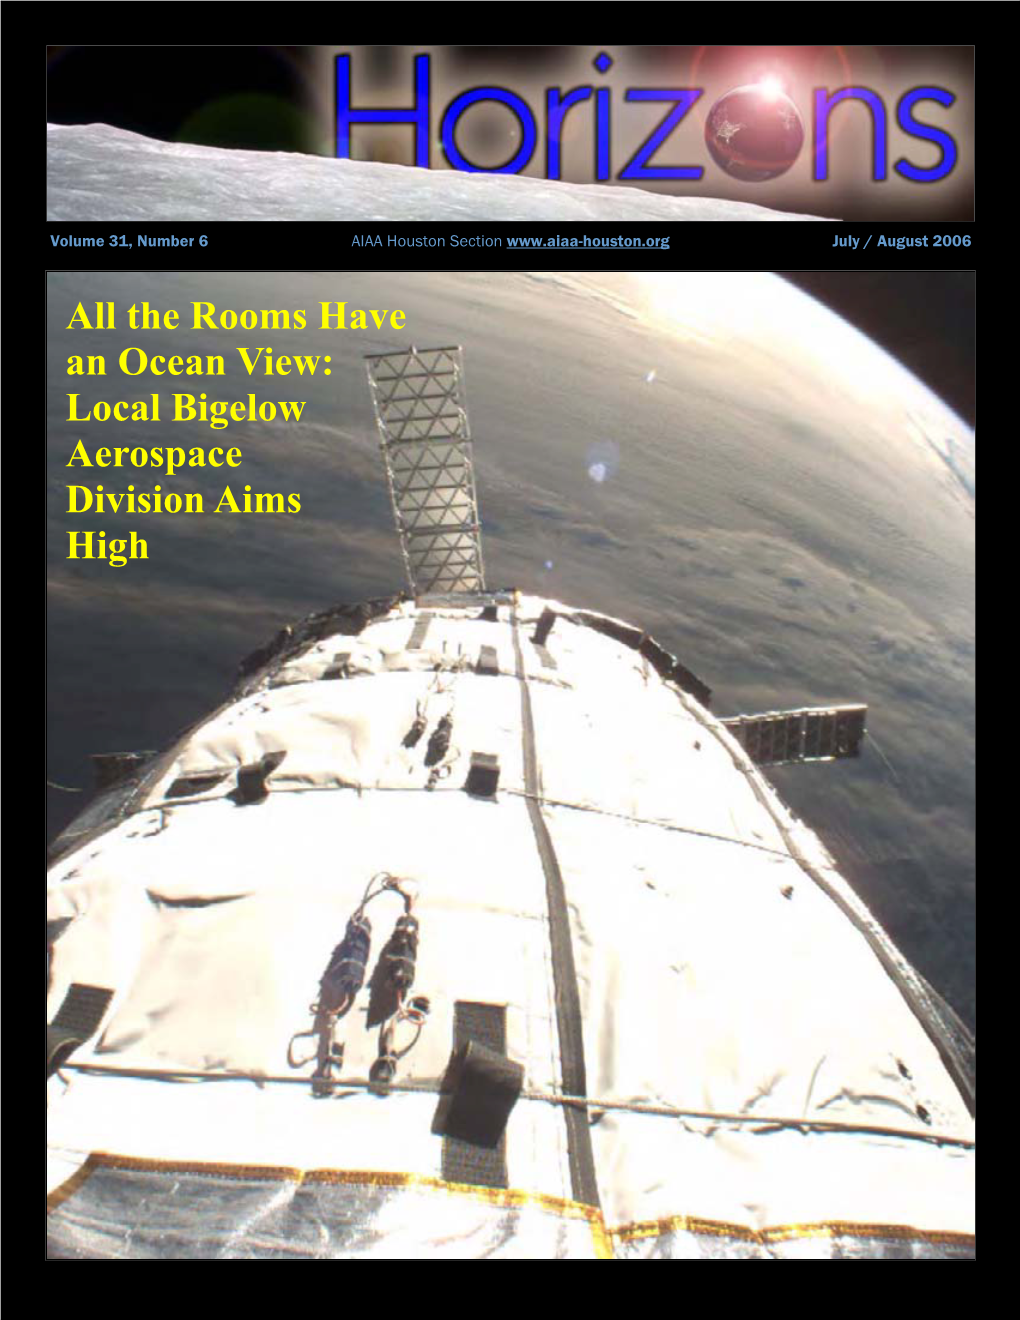 AIAA Houston Horizons July / August 2006 Page 1